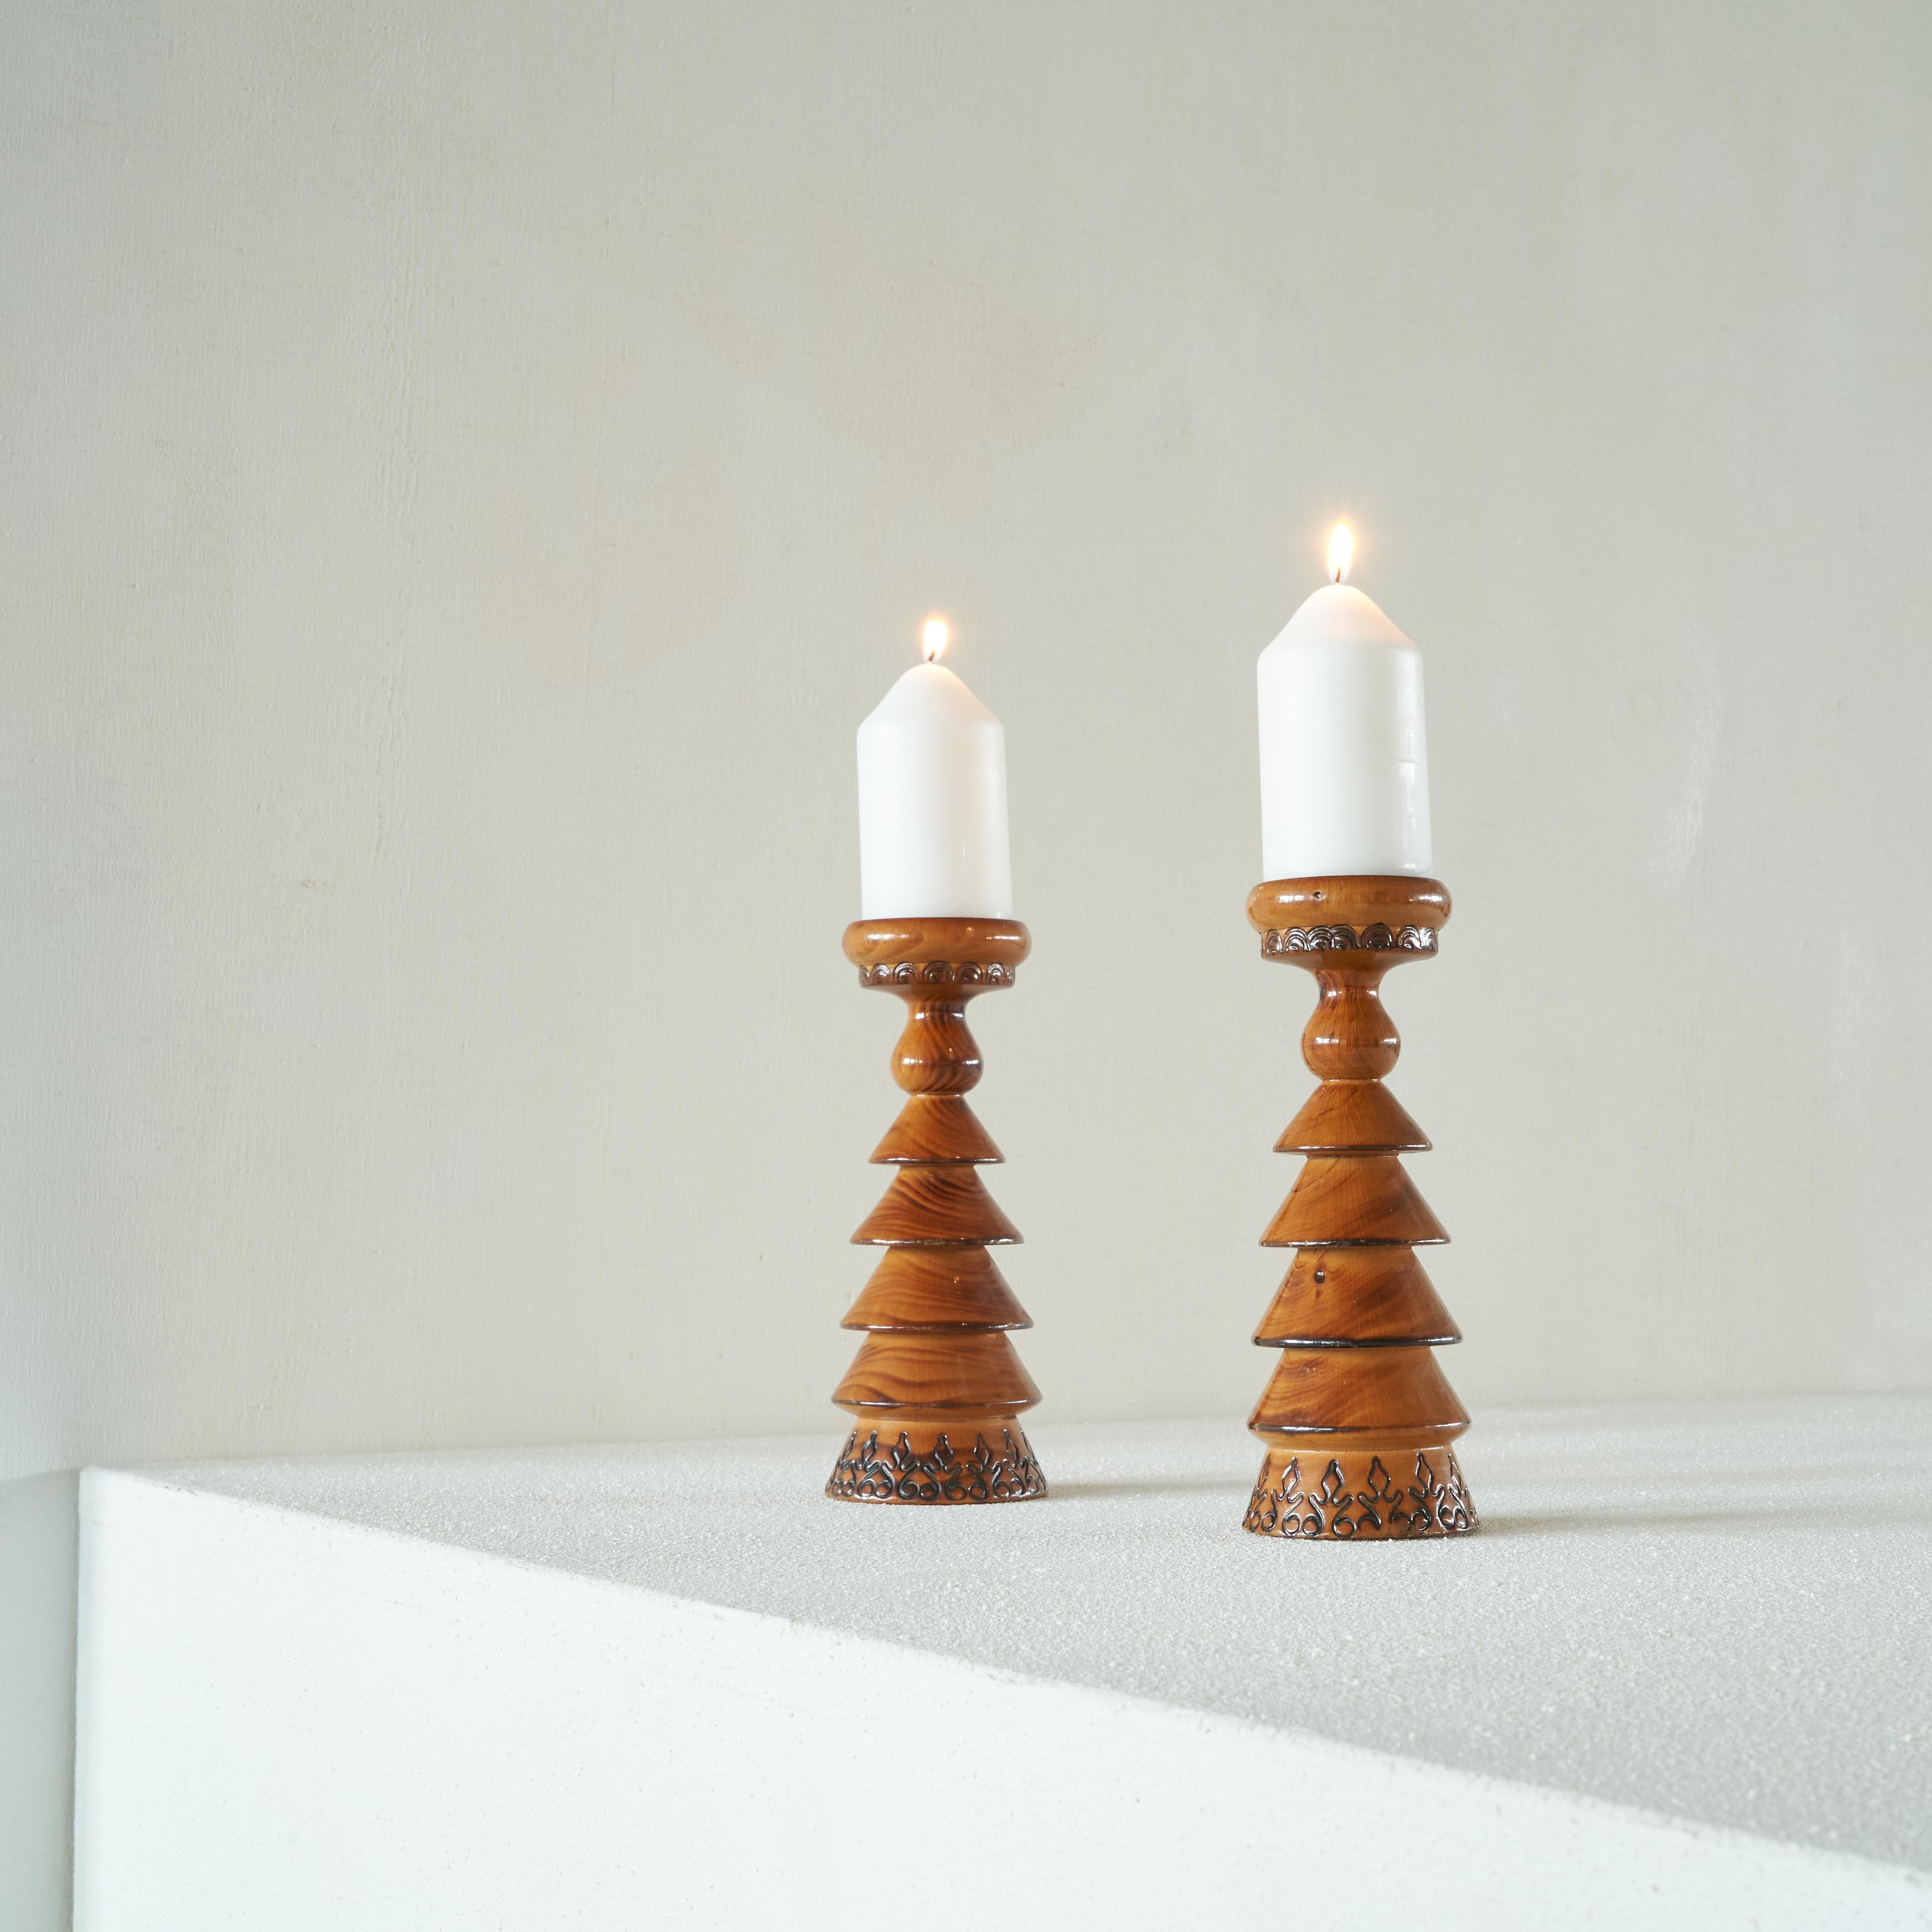 Pair of lacquered Scandinavian wooden candlesticks. Pine, mid 20th century.

A beautiful pair of remarkable and special candlesticks. Made of pine and lacquered in thick and glossy manner with a beautiful craquelé viewed up close. The color and